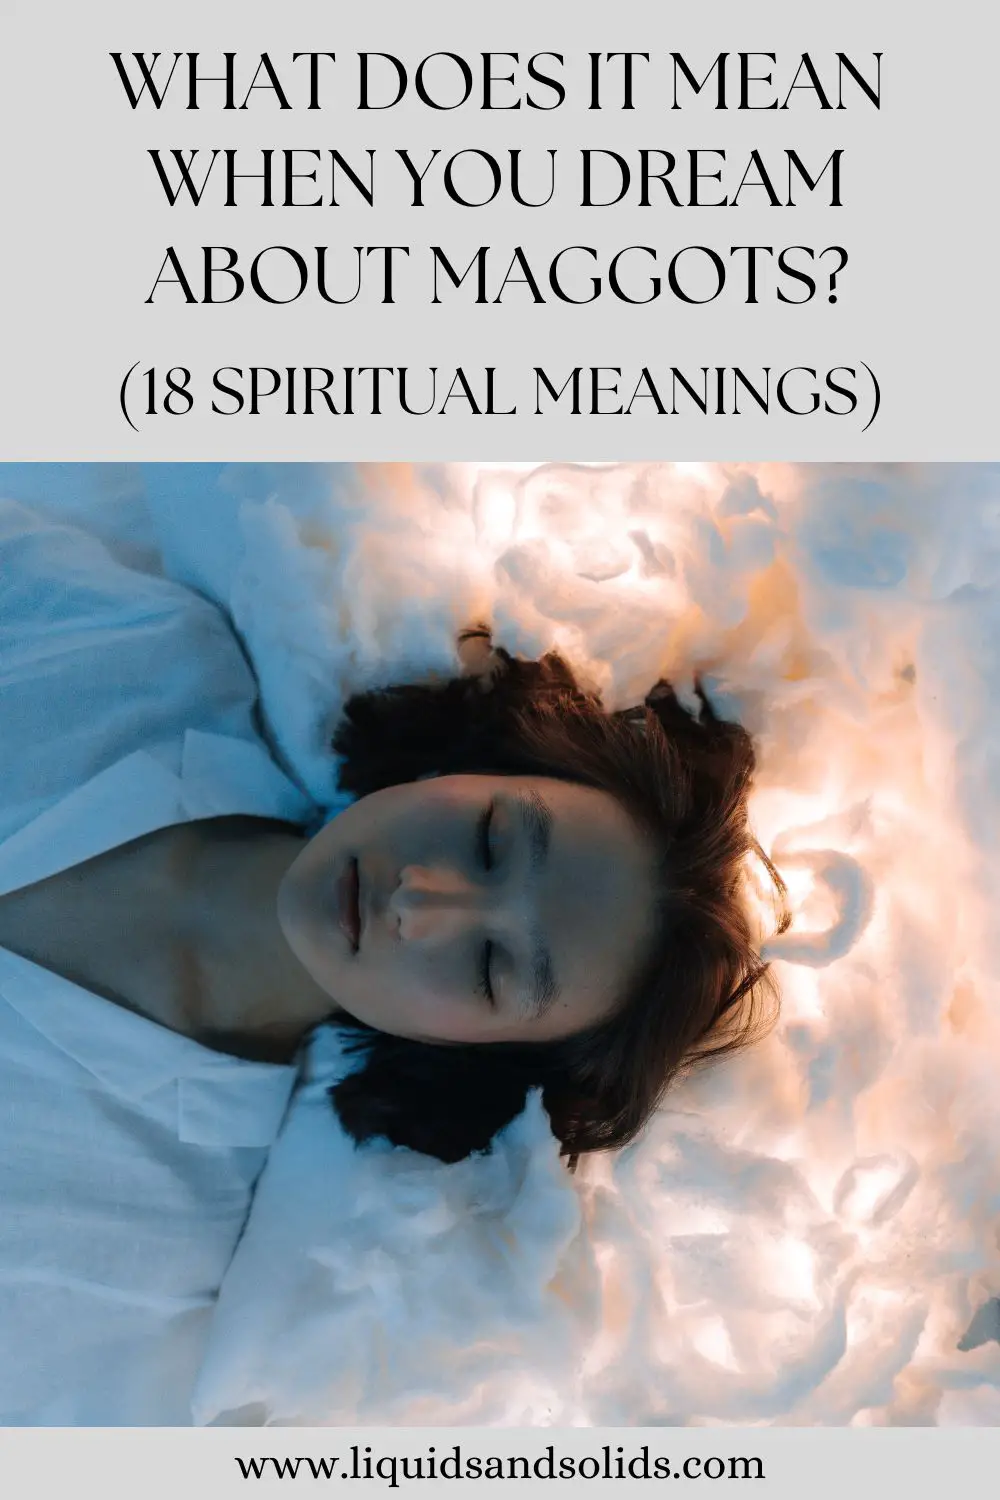 What Does It Mean When You Dream About White Maggots?